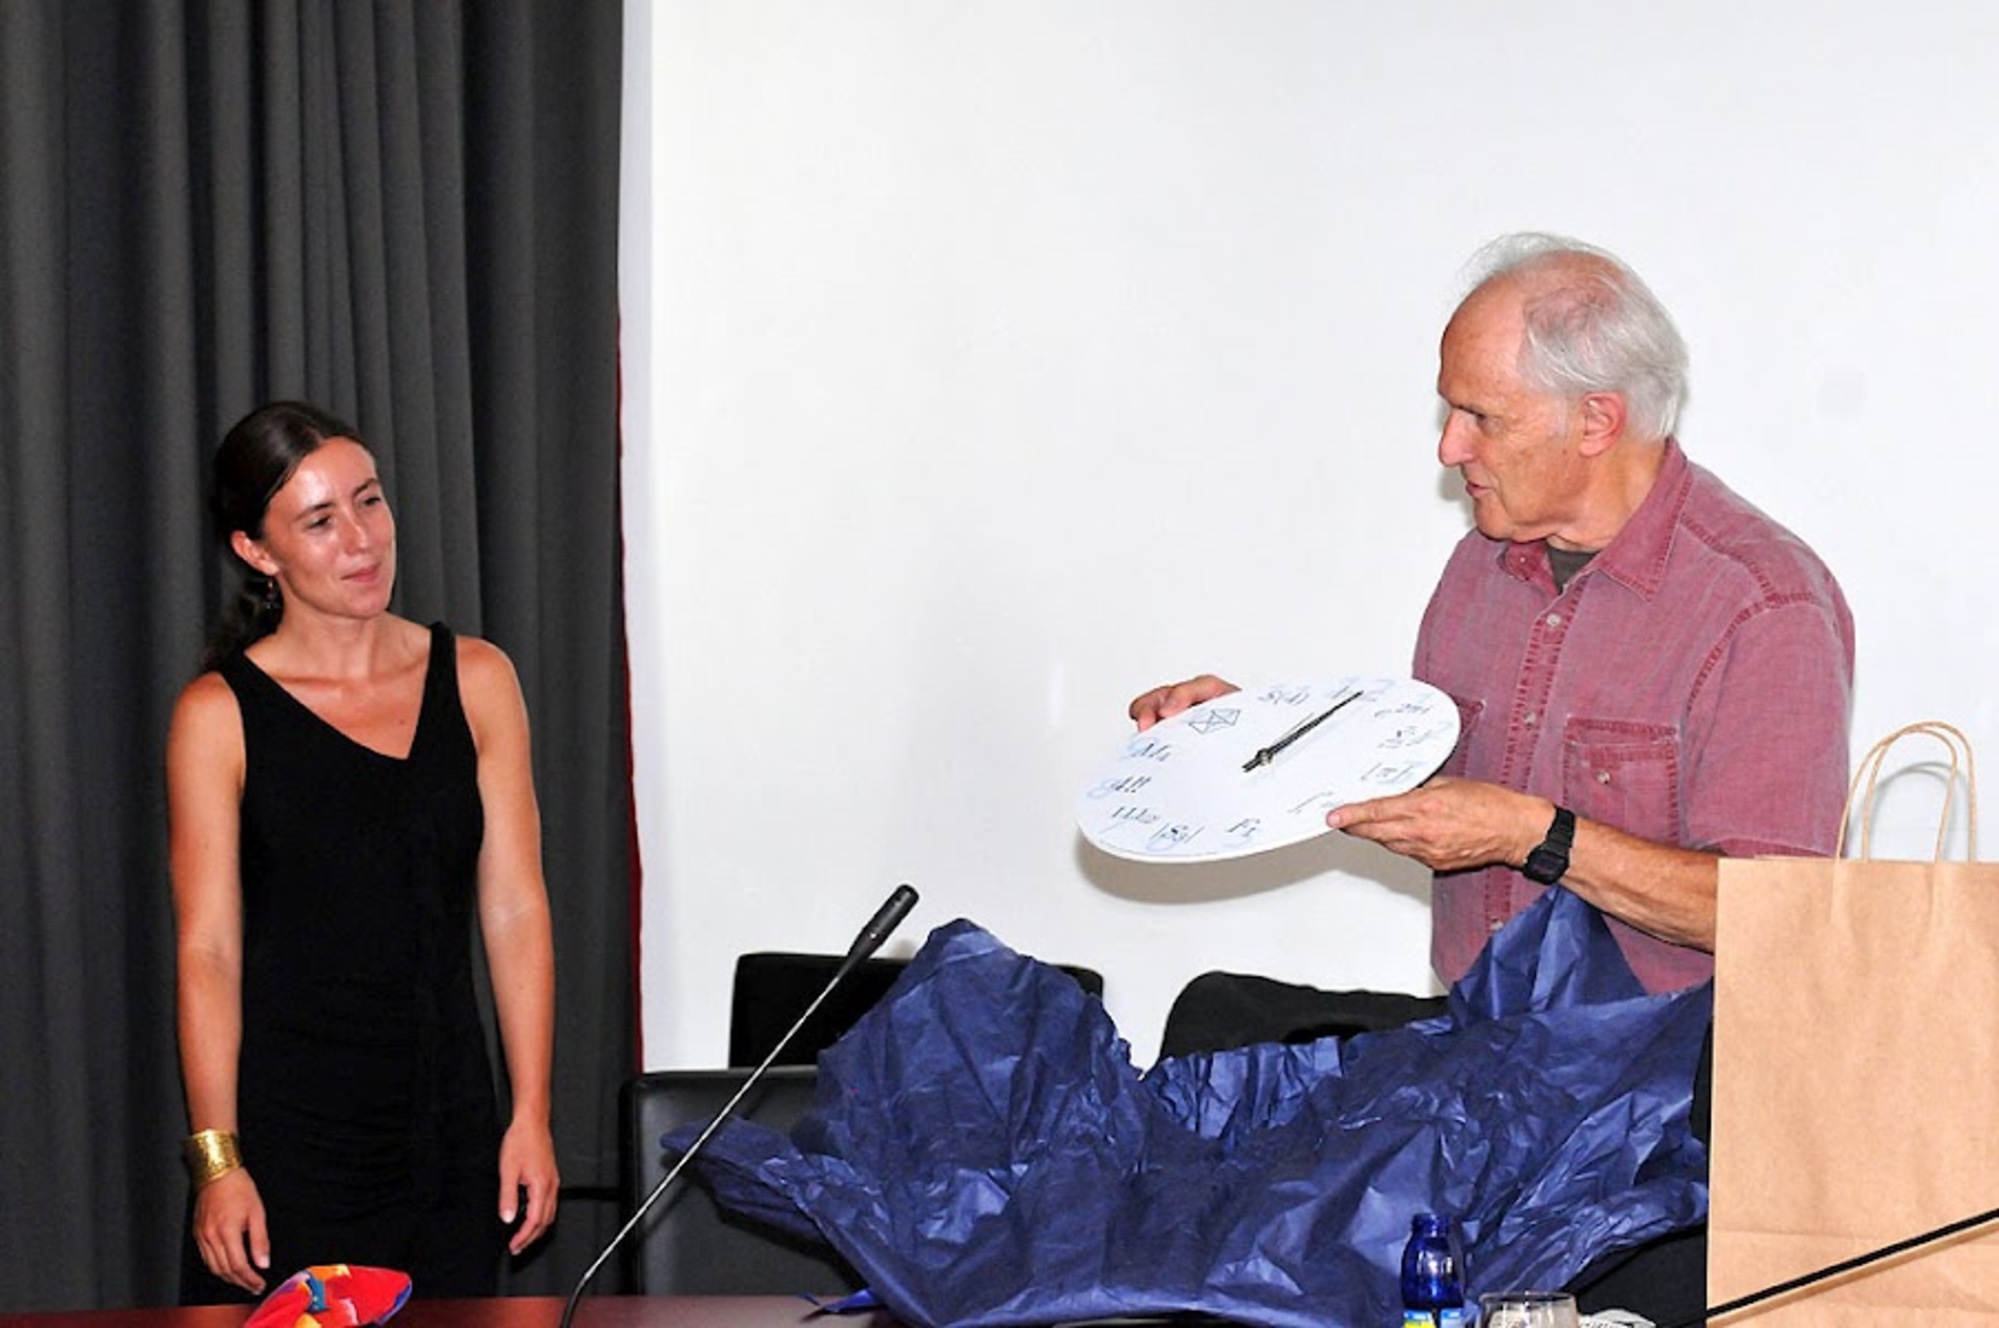 Dean of UP FAMNIT, Assist. Prof. Dr. Klavdija Kutnar, presents Prof. Dr. Sir Harold Kroto with a mathematical clock from UP FAMNIT after a formal reception hosted by the Rector of the University of Primorska, Prof. Dr. Dragan Marušič, (Koper, 24 August 2012)